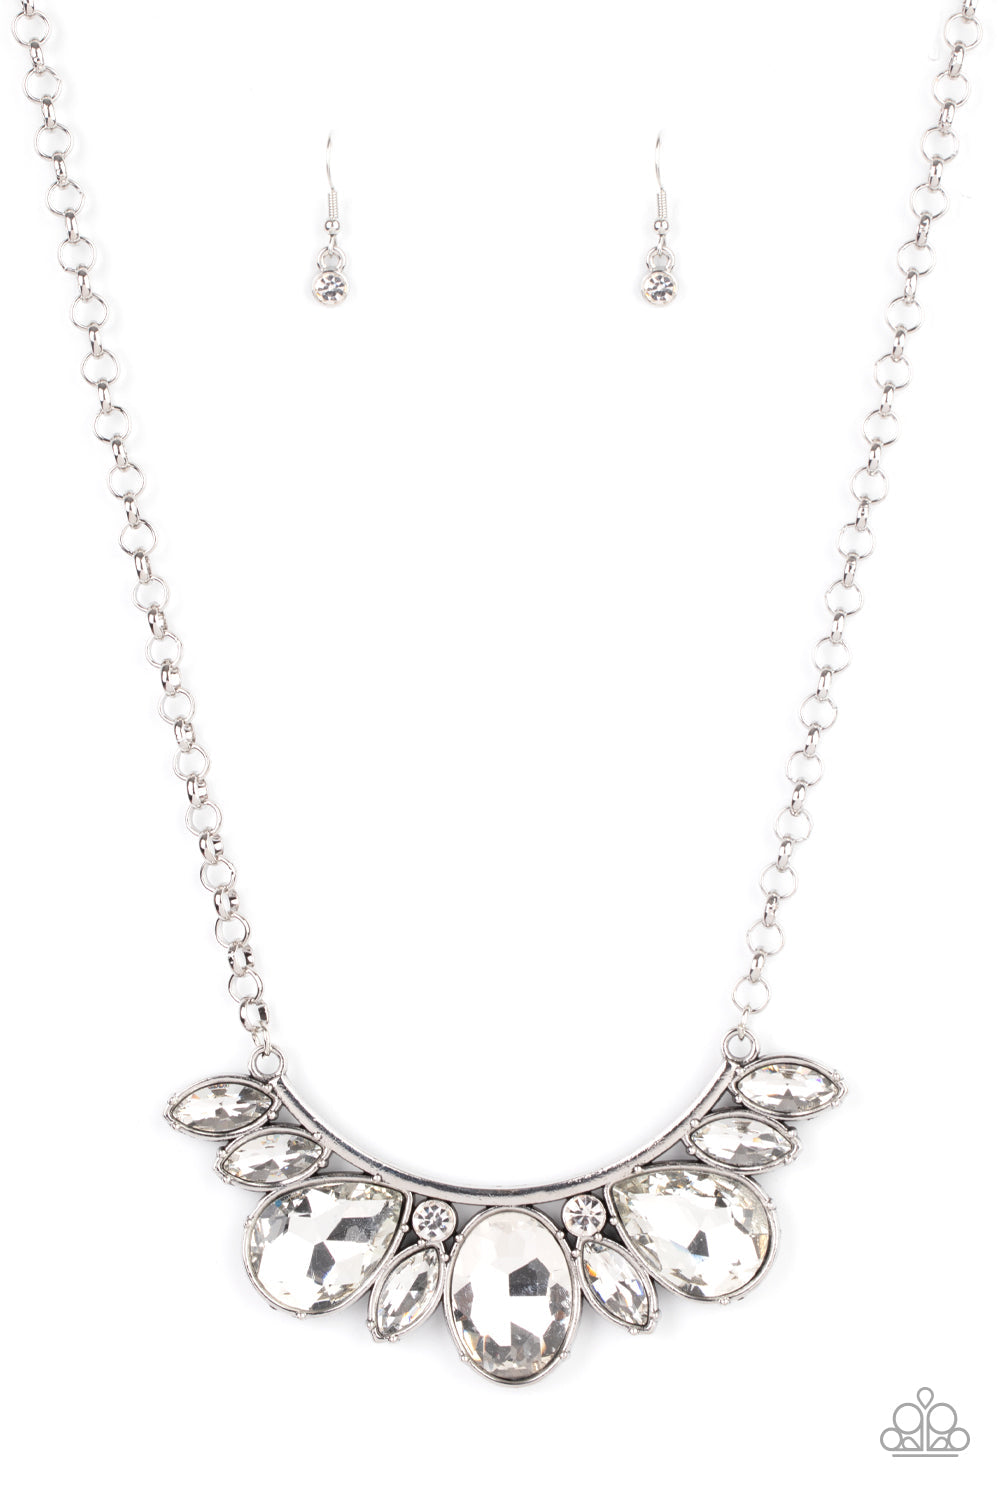 Never SLAY Never - White and Silver Necklace - Paparazzi Accessories - An oversized collection of round, marquise, and teardrop white rhinestones drip from the bottom of a bowing silver bar, coalescing into a sassy statement piece below the collar. Features an adjustable clasp closure fashion necklace. 